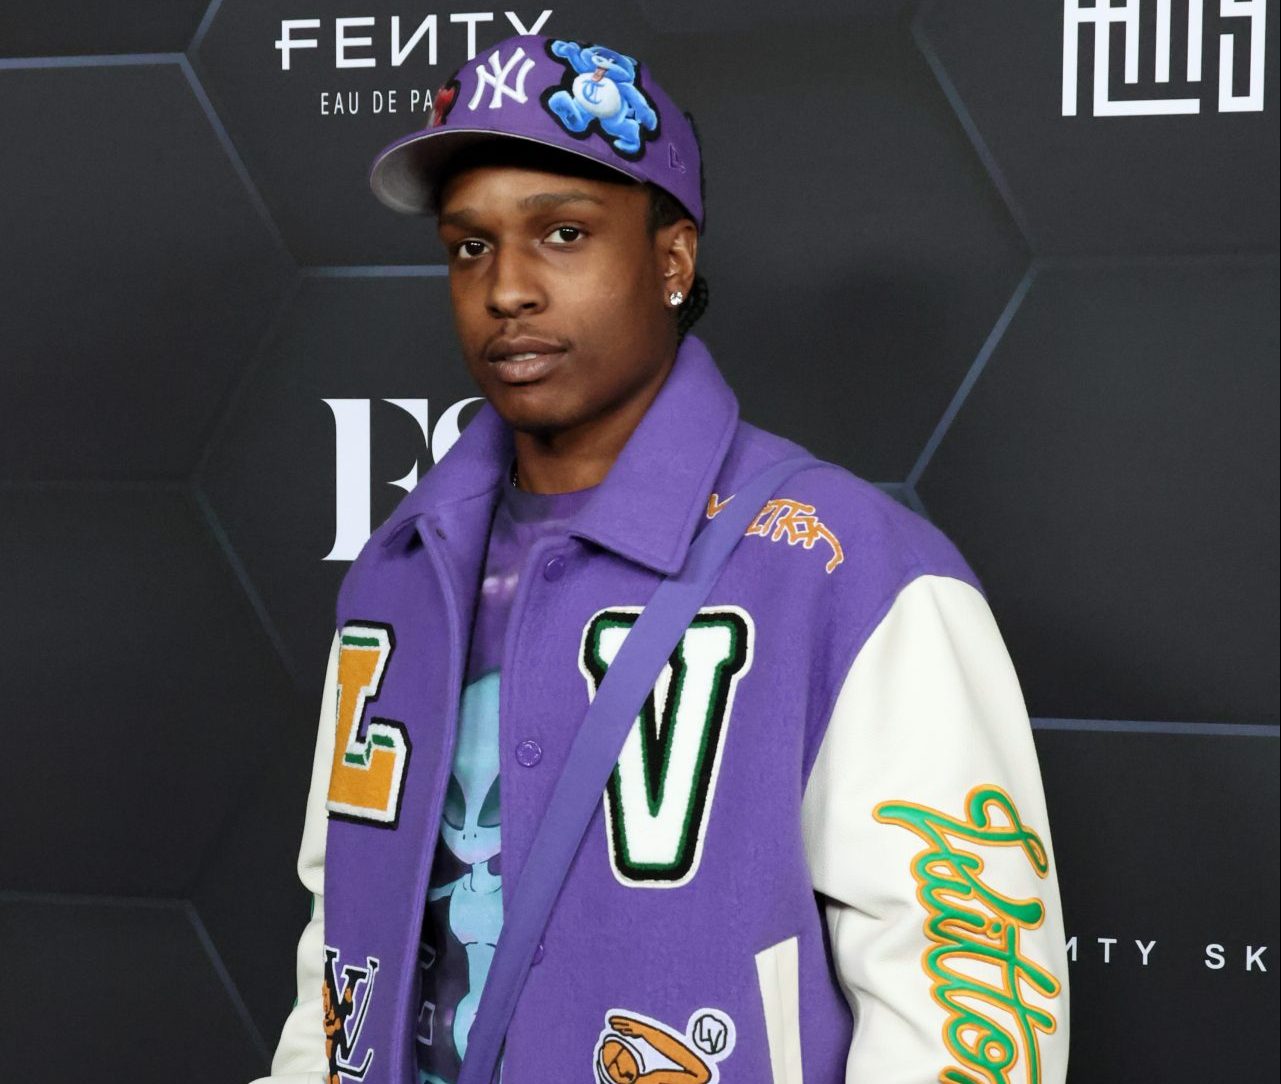 A$AP Rocky was arrested for 2021 shooting on Wednesday after arriving to LAX airport from Barbados via private plane.